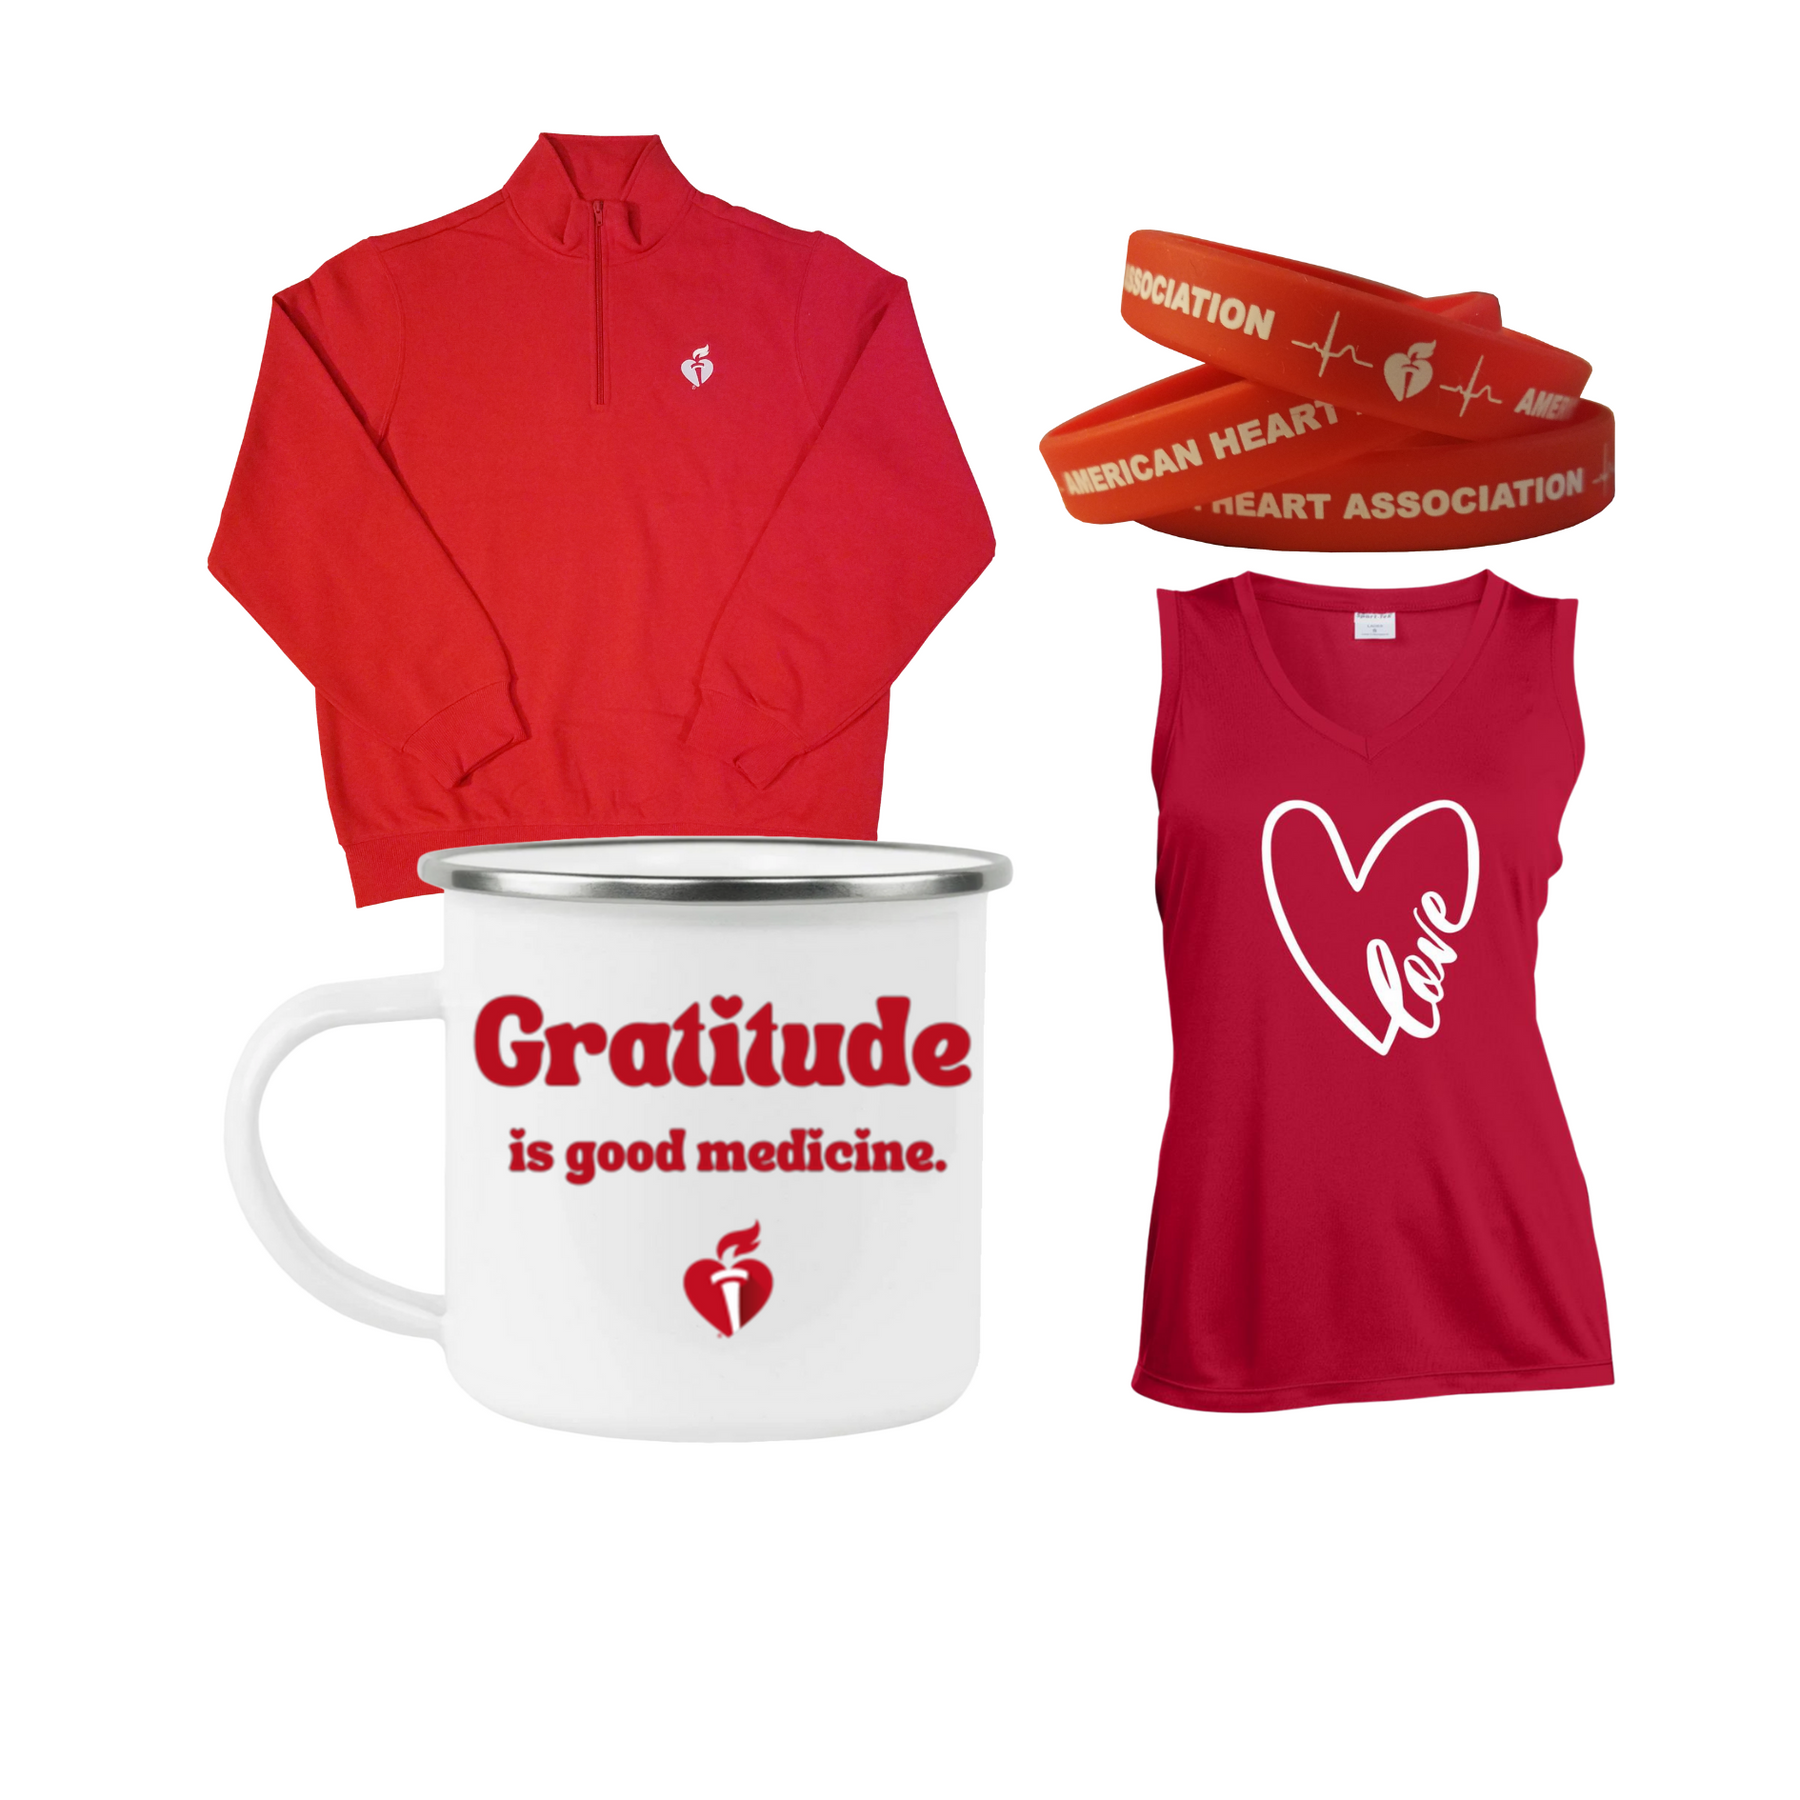 red 1/4 zip pullover, red wristbands with EKG and logo, red tank with heart that says 